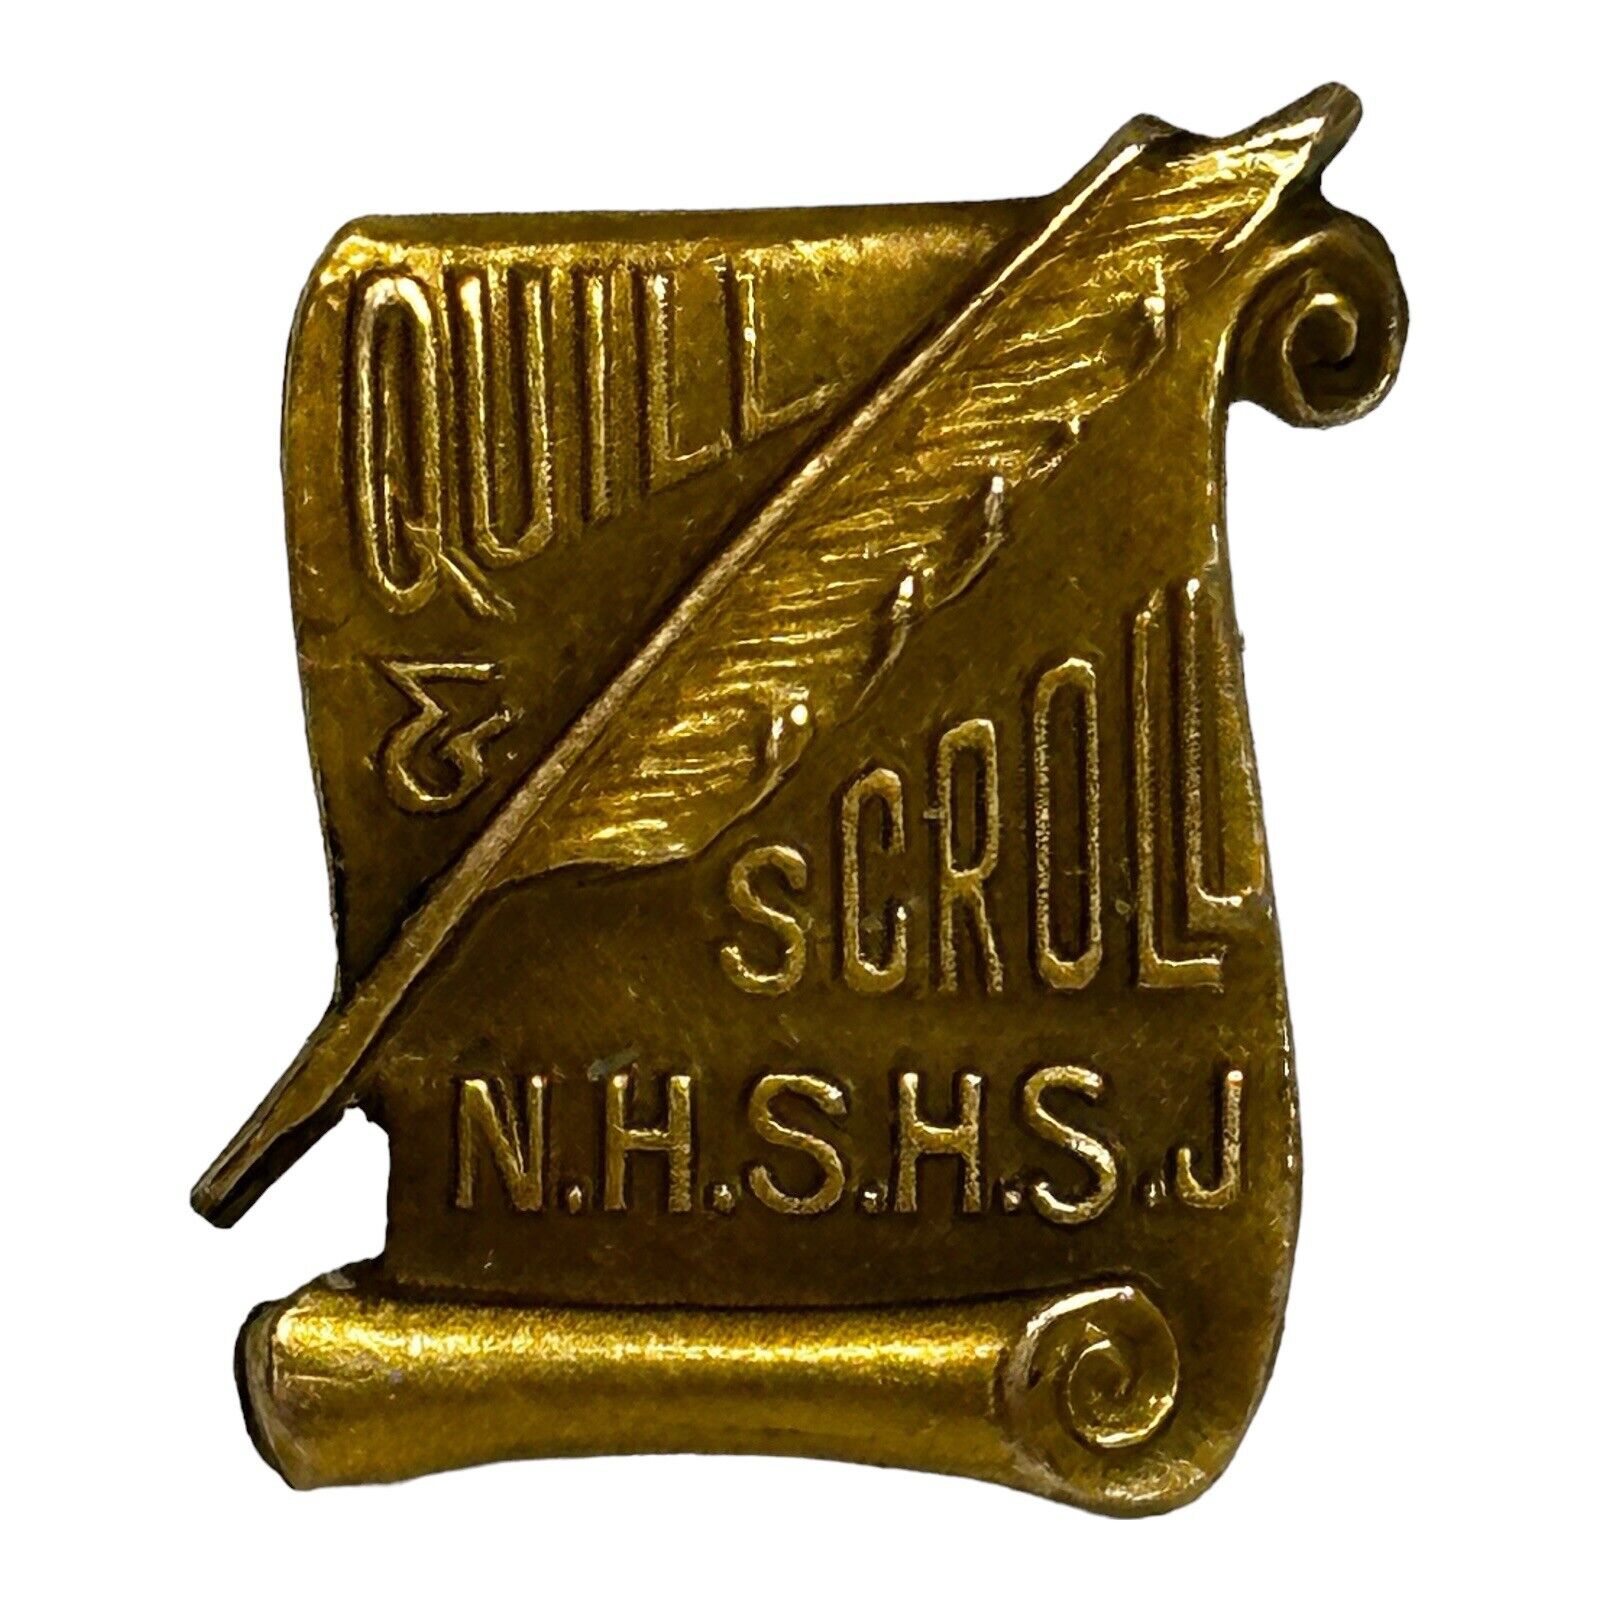 Rare Early Quill and Scroll Honor Society Pin - Auld Co. Mark, 1926-1931, VTG